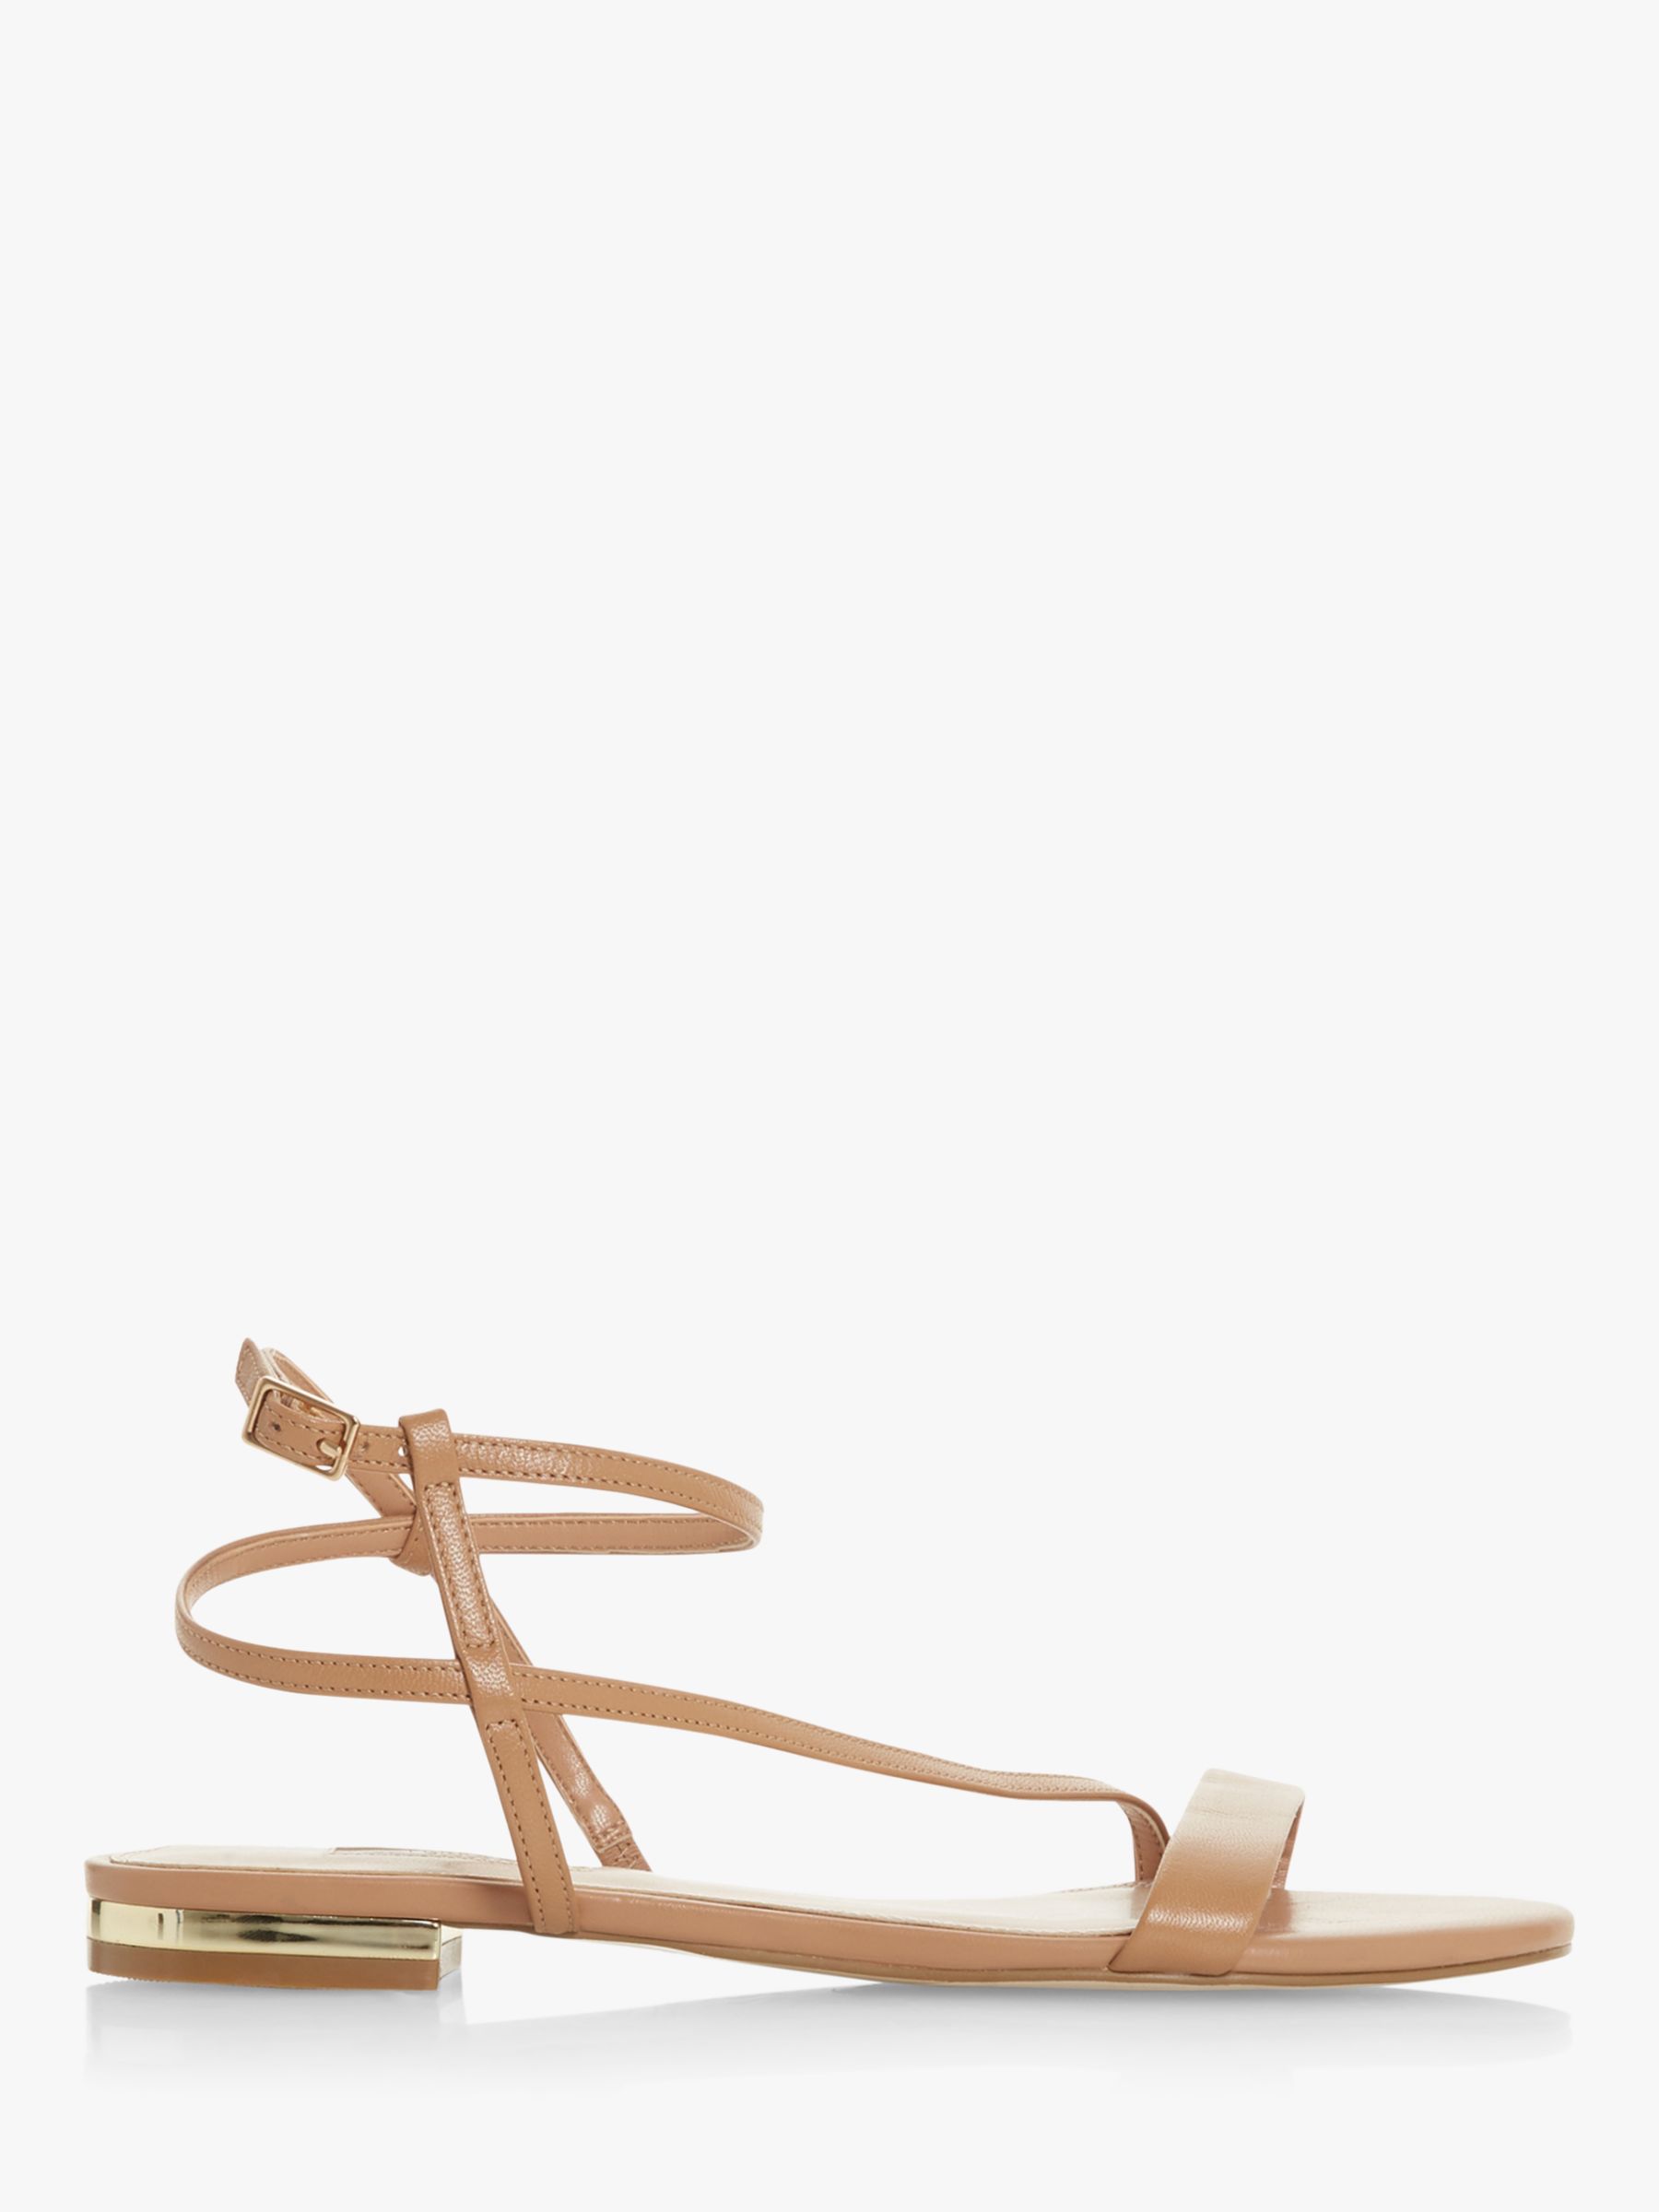 Dune Nicoletta Strappy Flat Leather Sandals, Camel at John Lewis & Partners